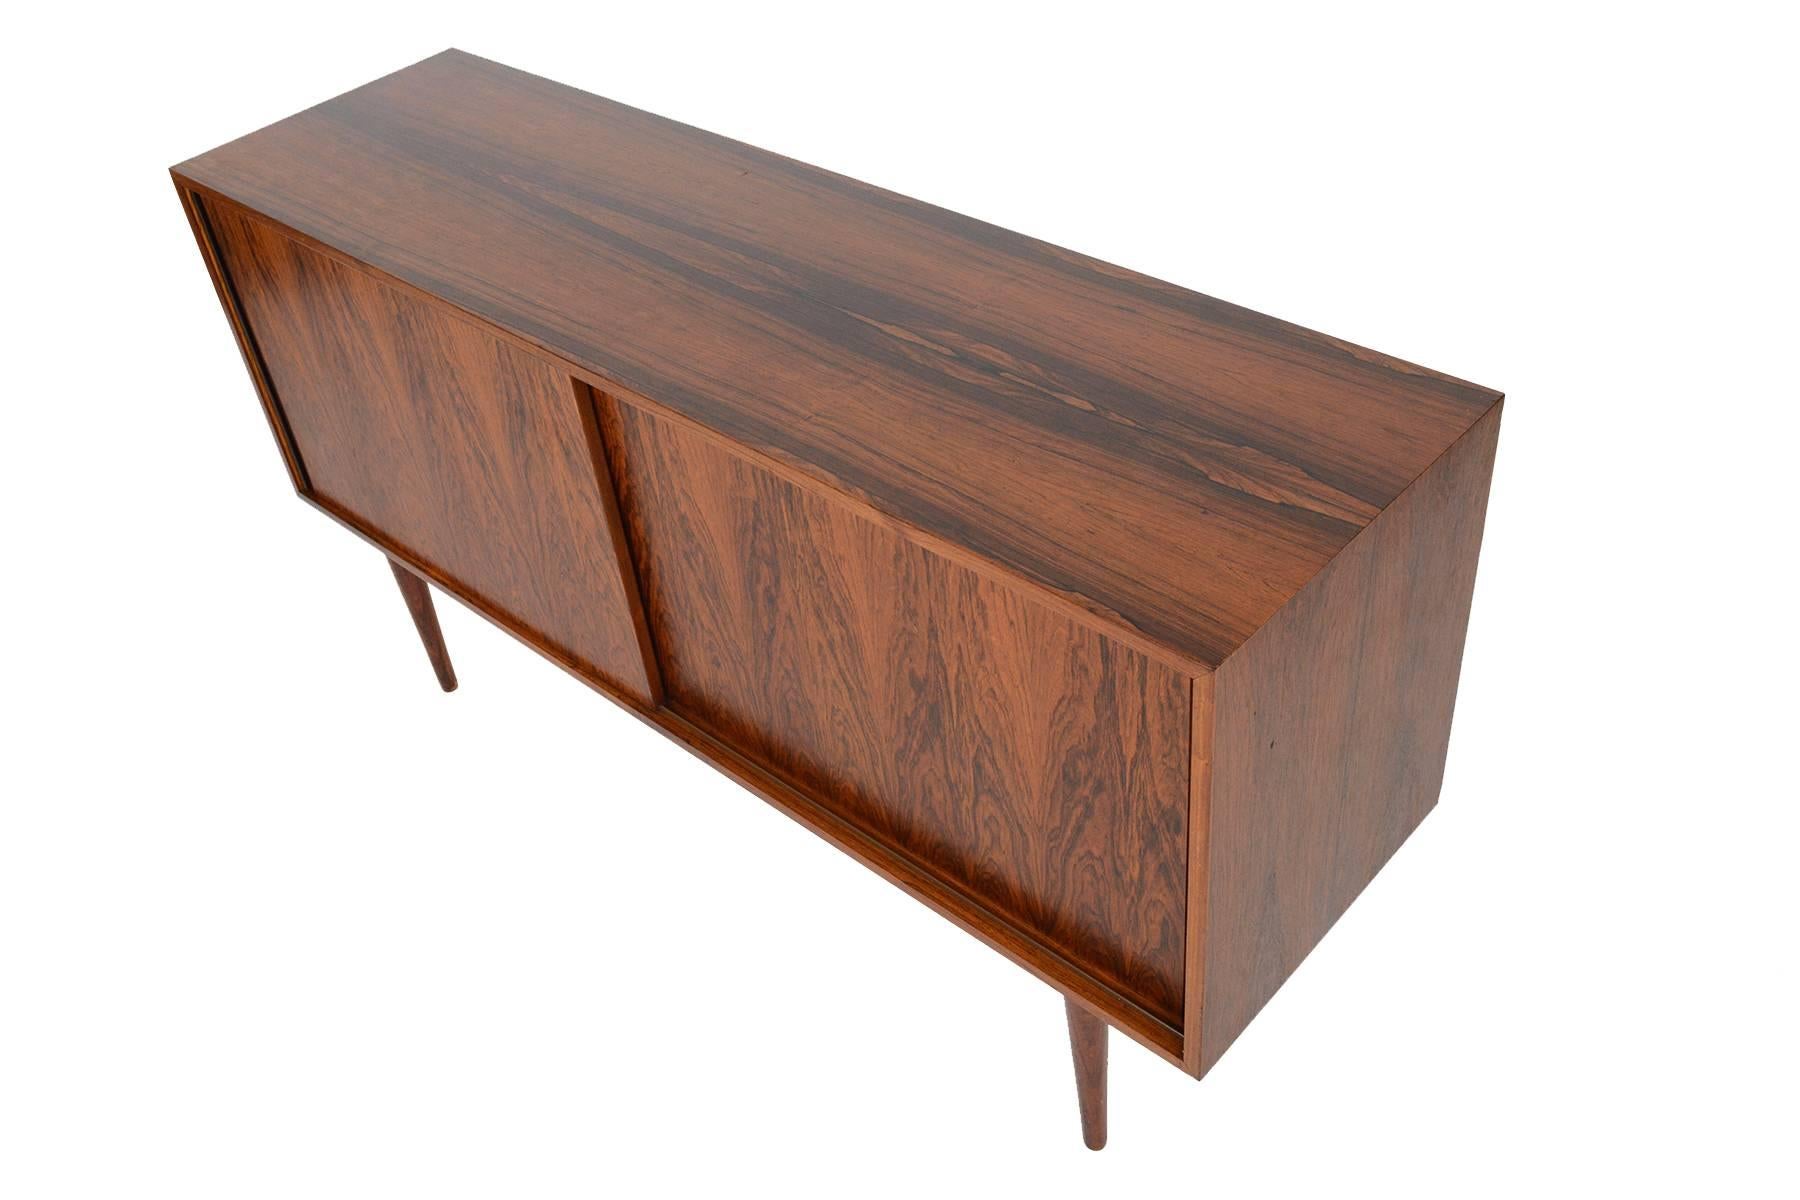 This Danish modern Mid-Century credenza hails from the 1960s and is perfectly sized for any modern living space. Crafted in Brazilian rosewood with handsomely refined lines, two sliding doors open to reveal two bays with adjustable shelving. In